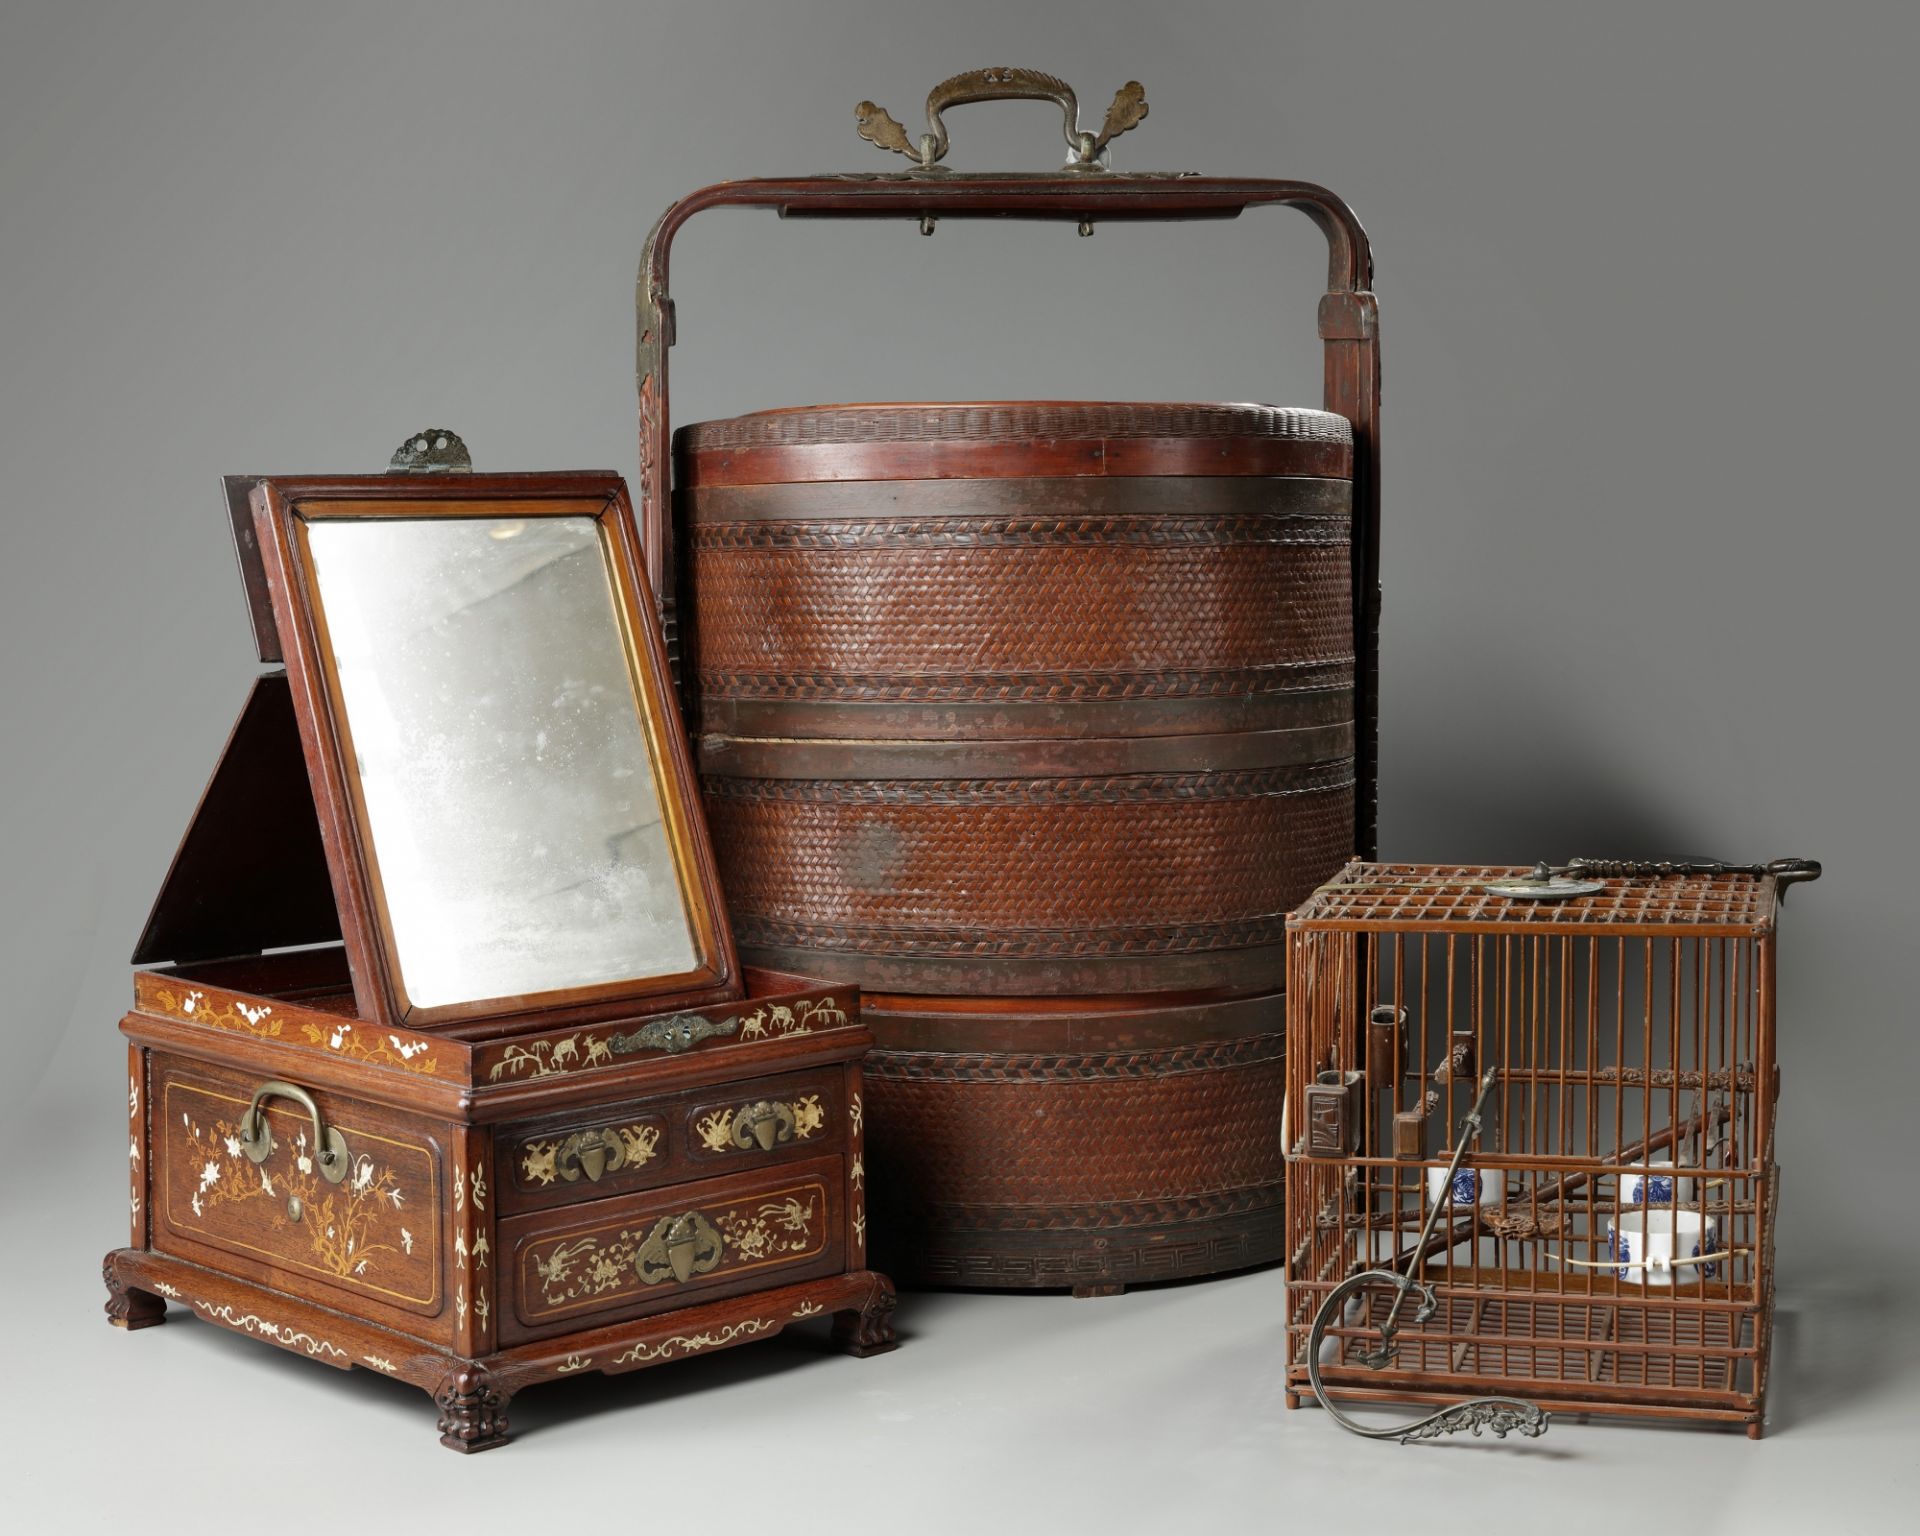 A Chinese bamboo bird cage, a marriage basket, and a bone-inlaid wood mirror box